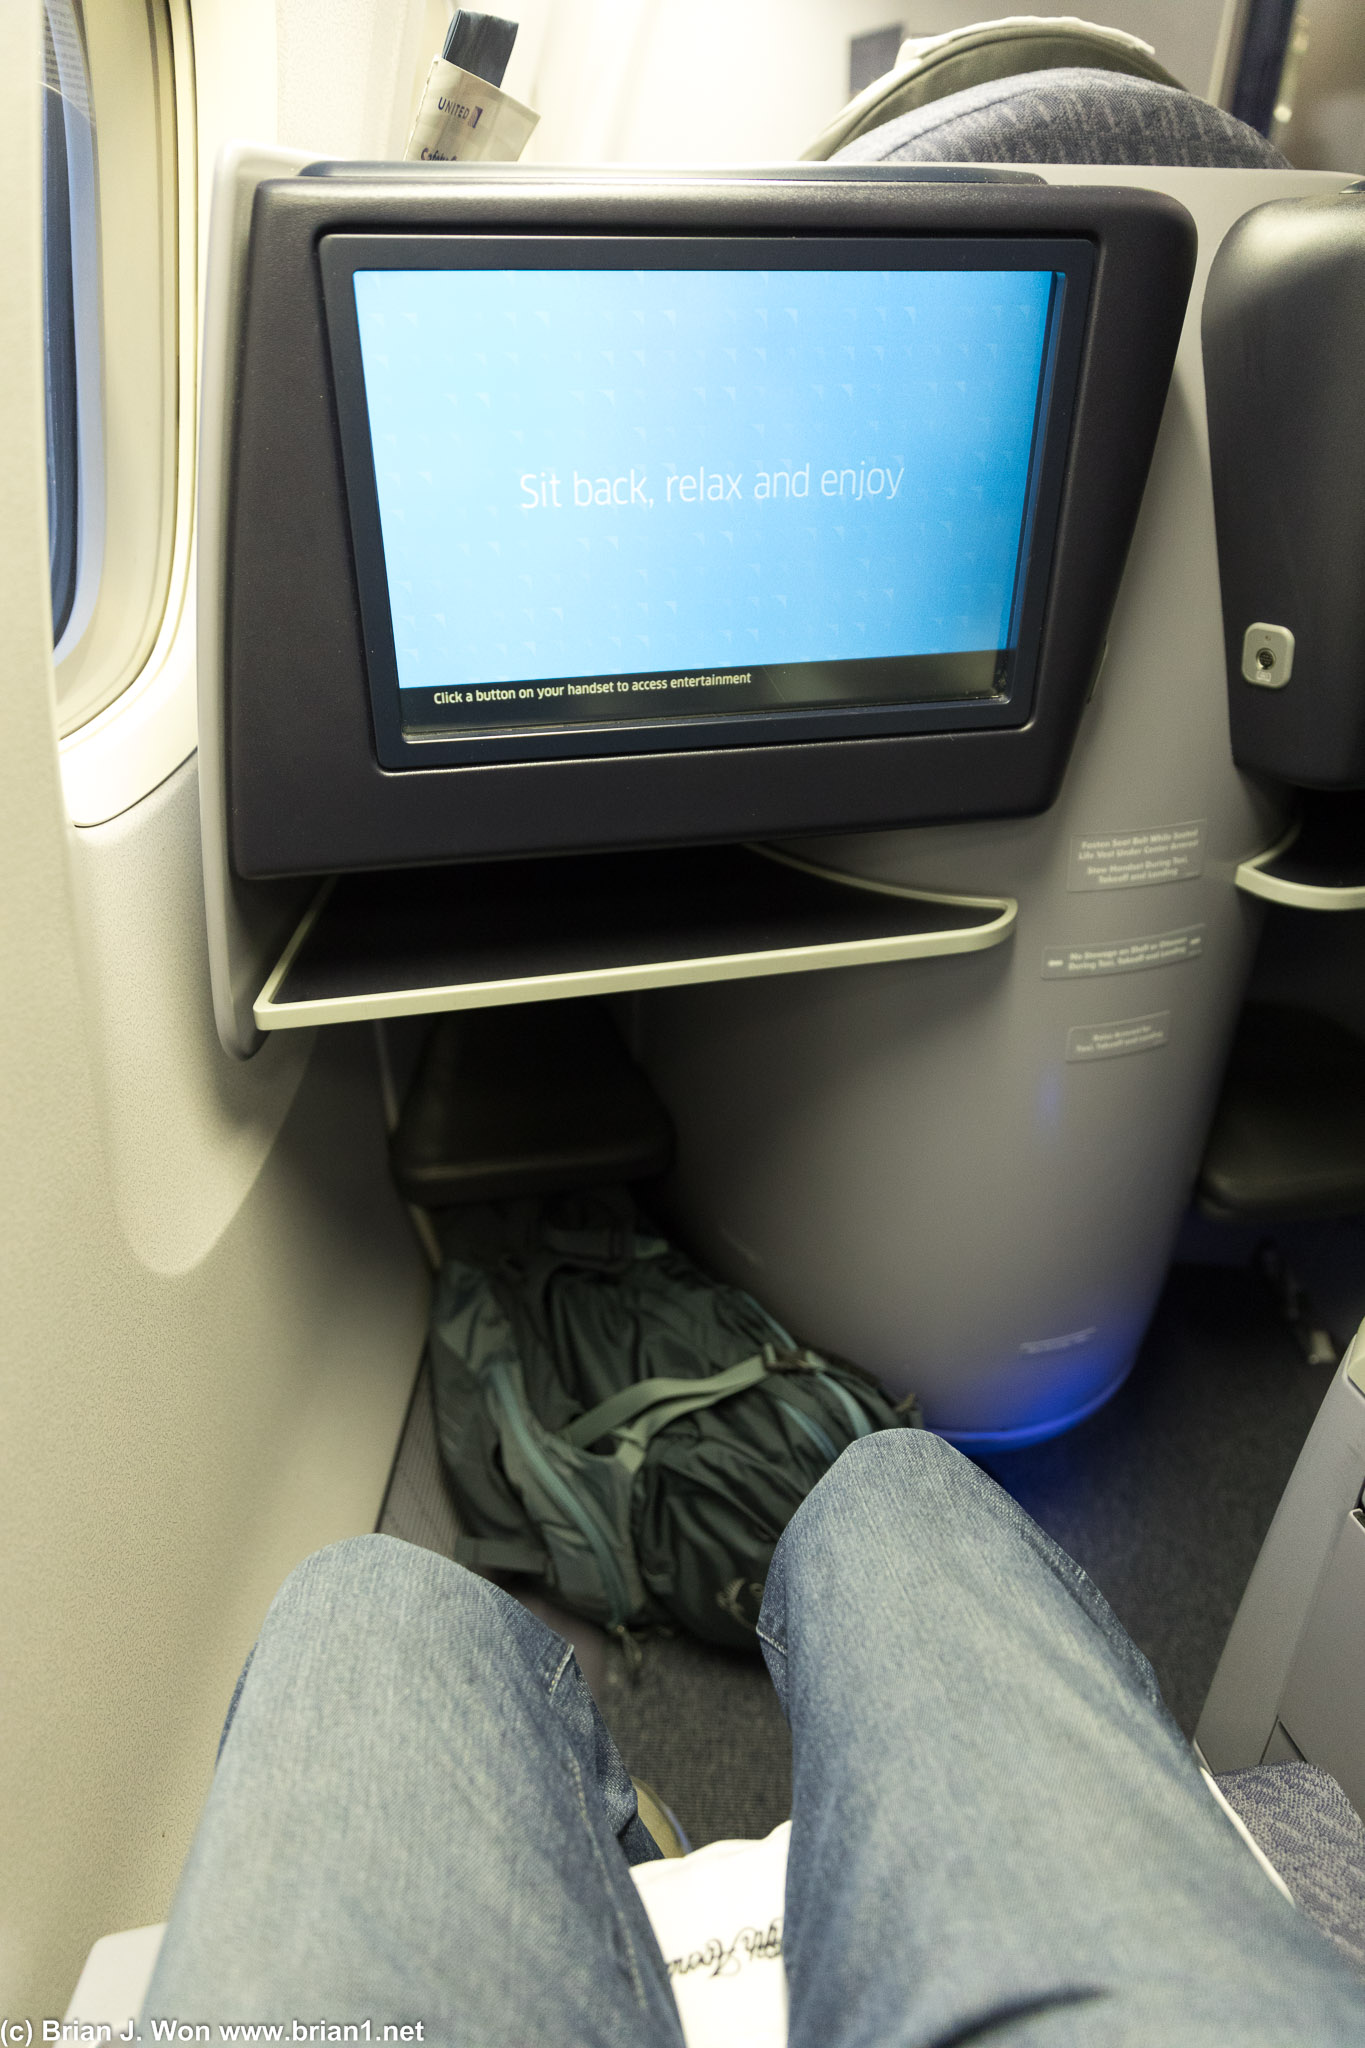 Old business class > economy. But not as good as the new Polaris.